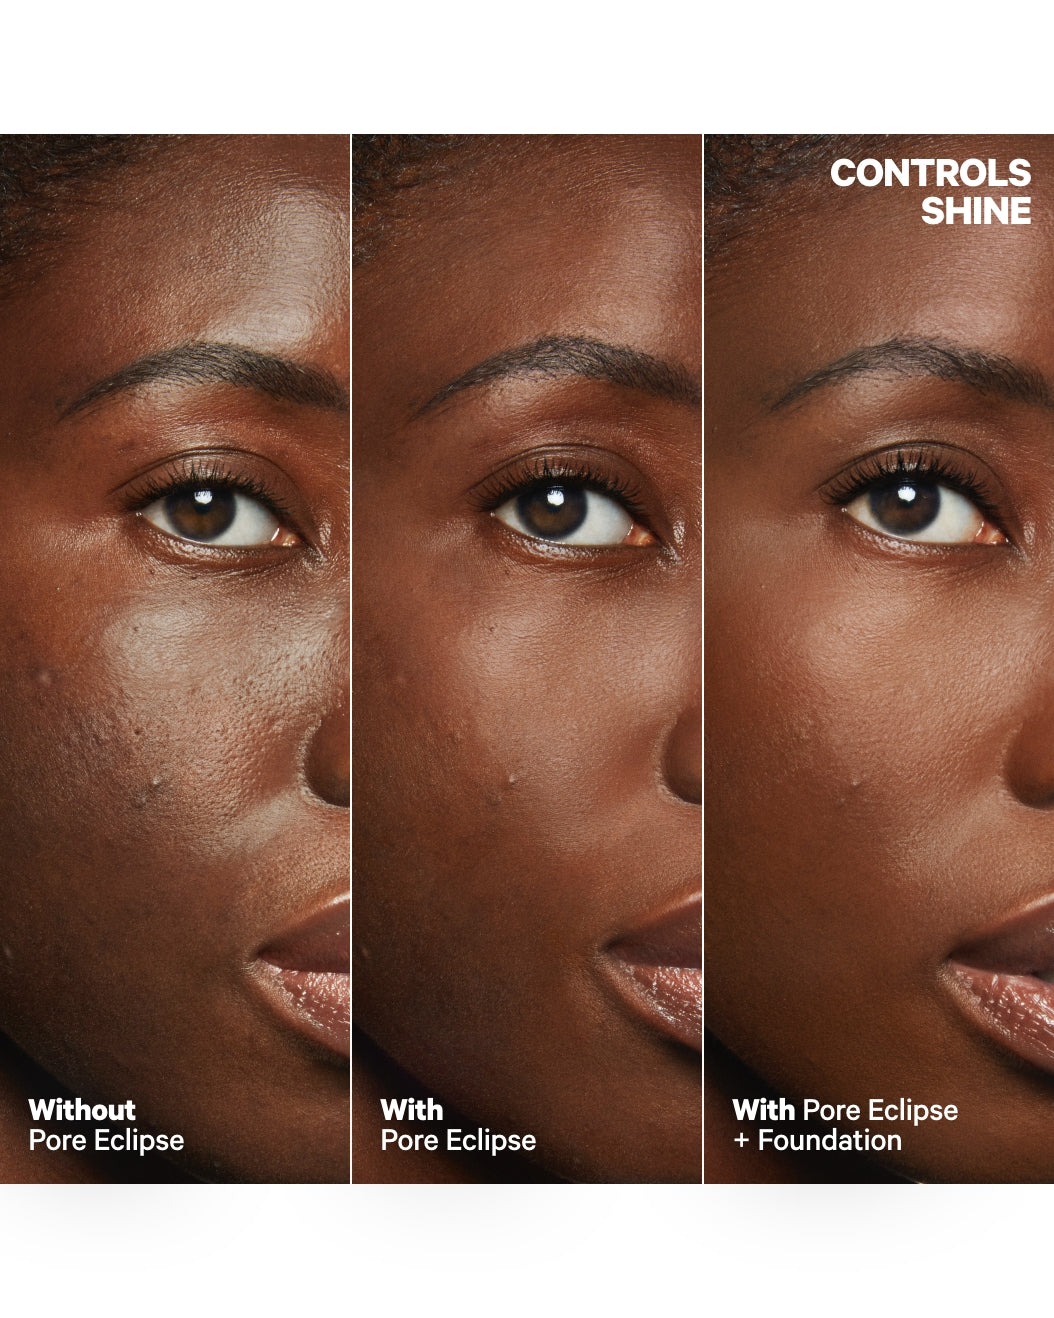 A model with visible pores and shine before wearing Milk Makeup Pore Eclipse Mattifying Primer.